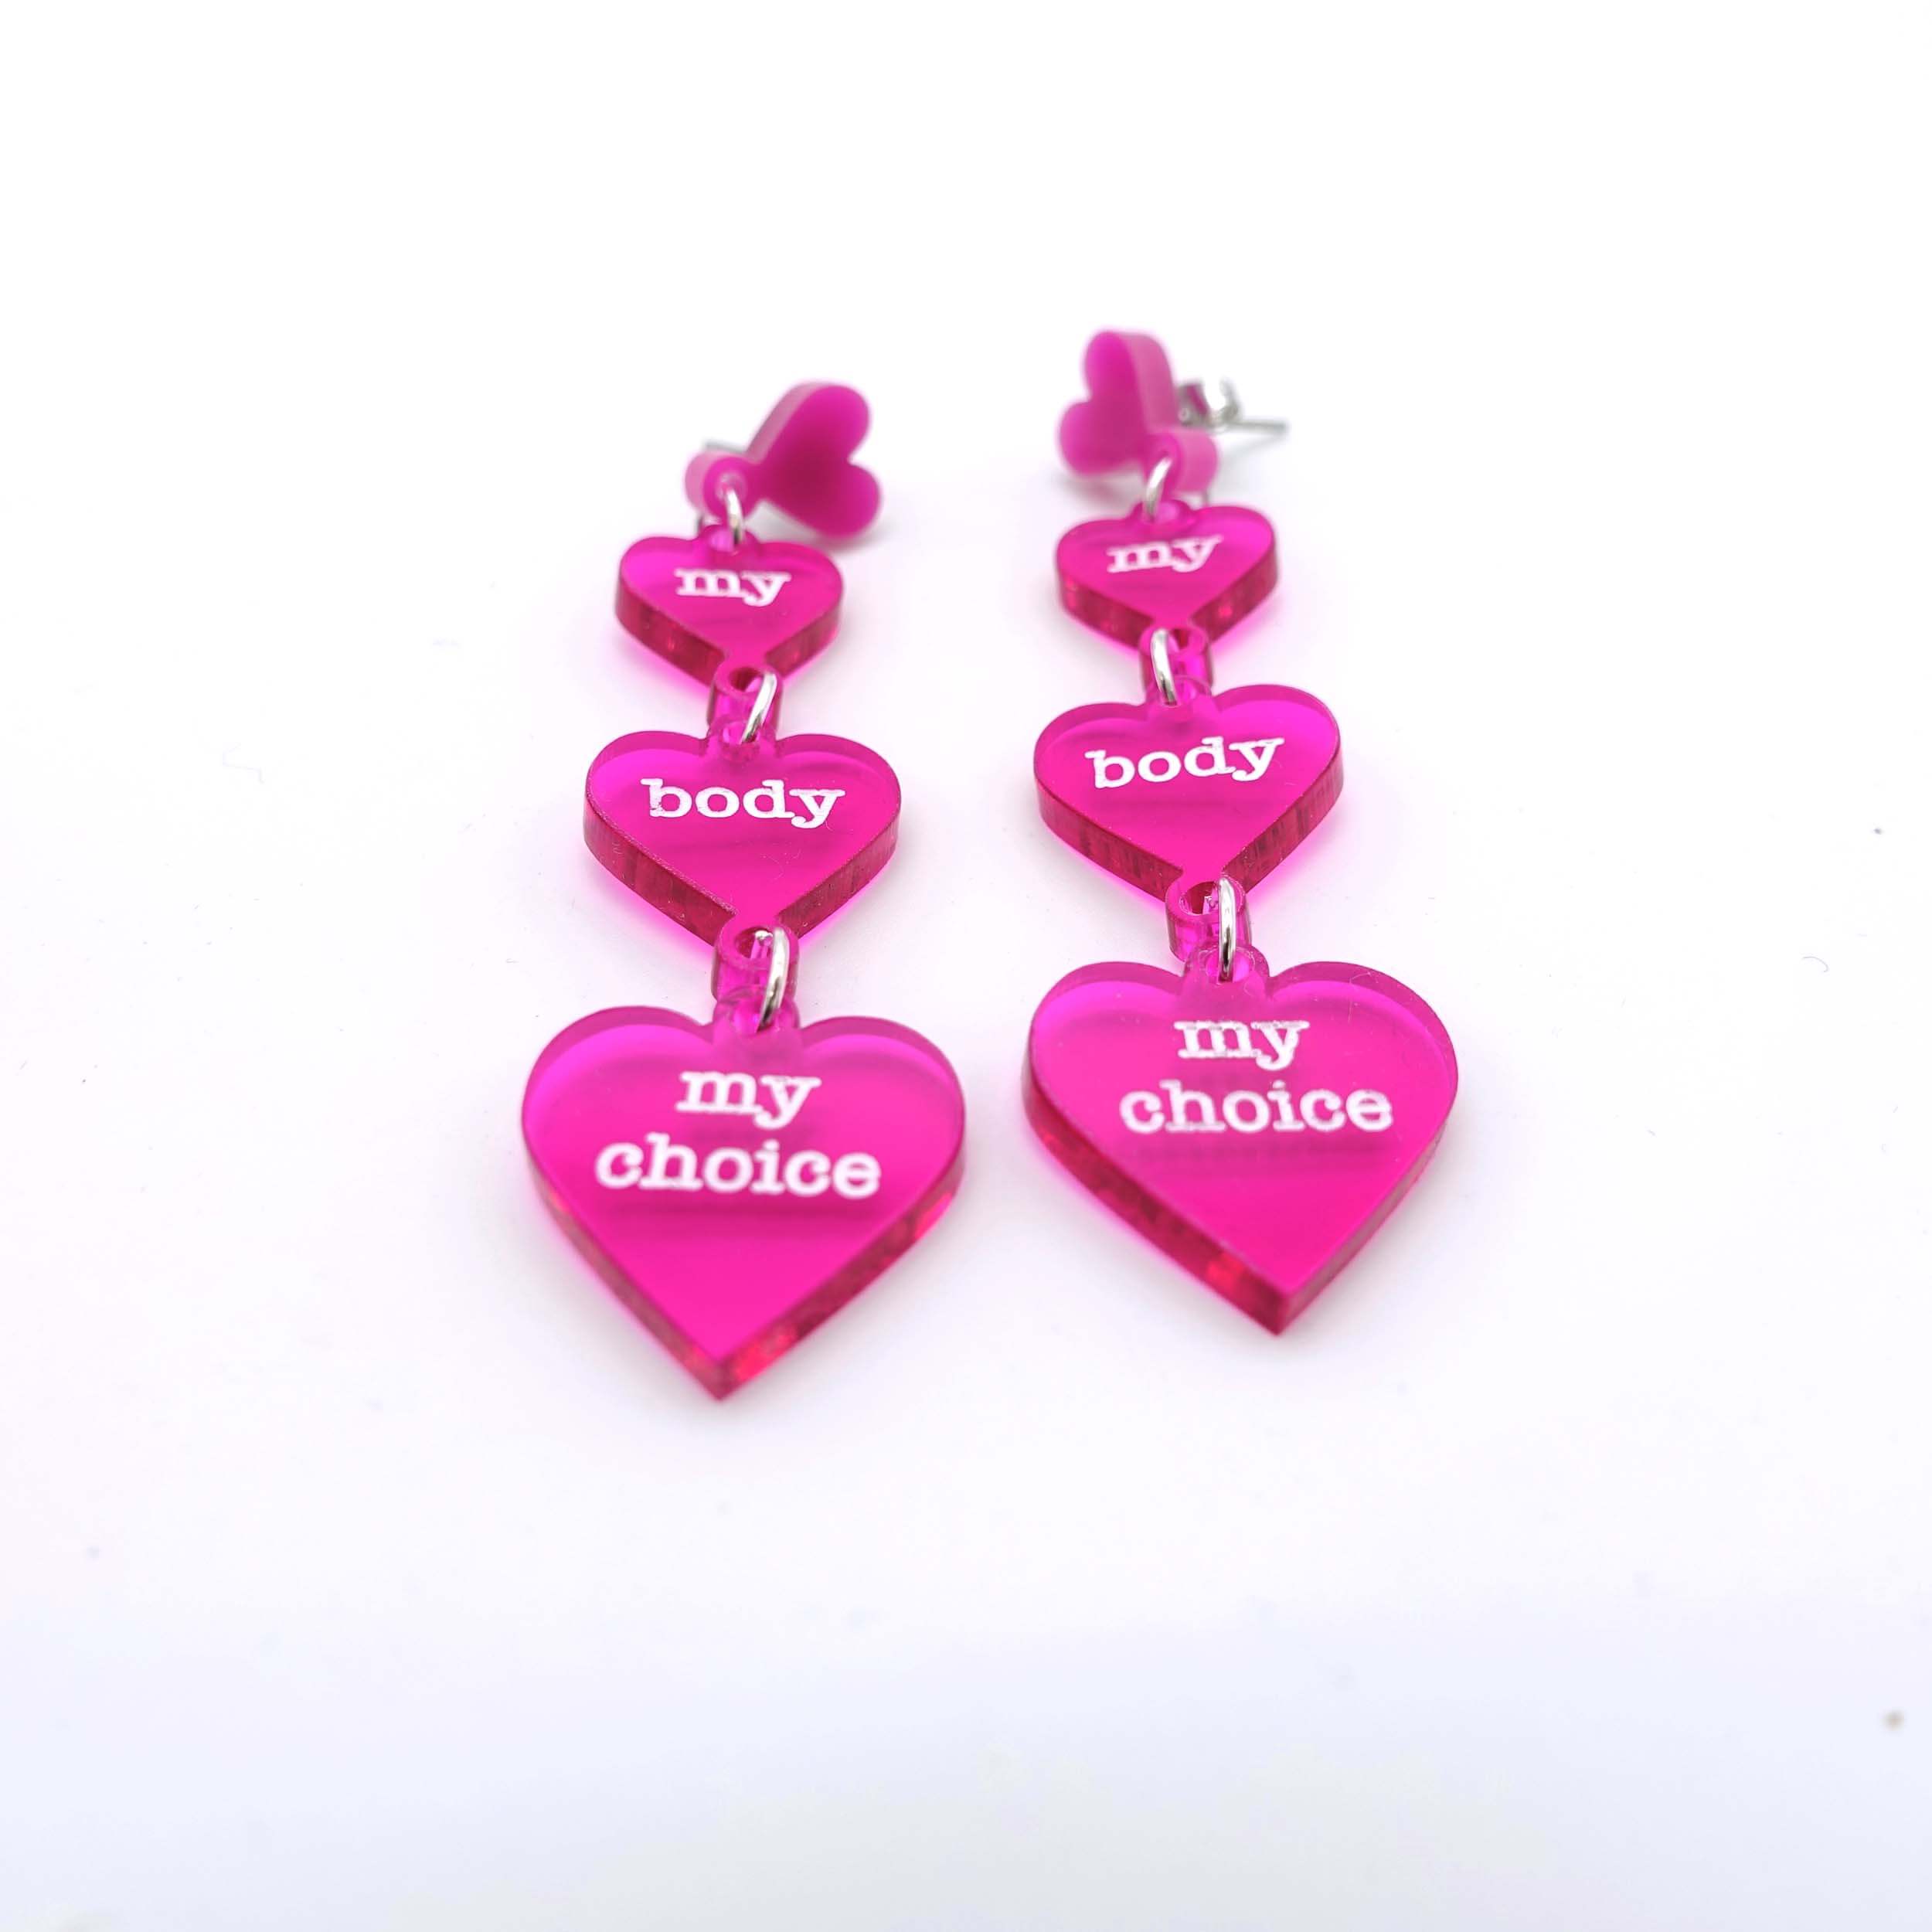 My body my choice heart drop earrings designed by Sarah Day for Wear and Resist. 